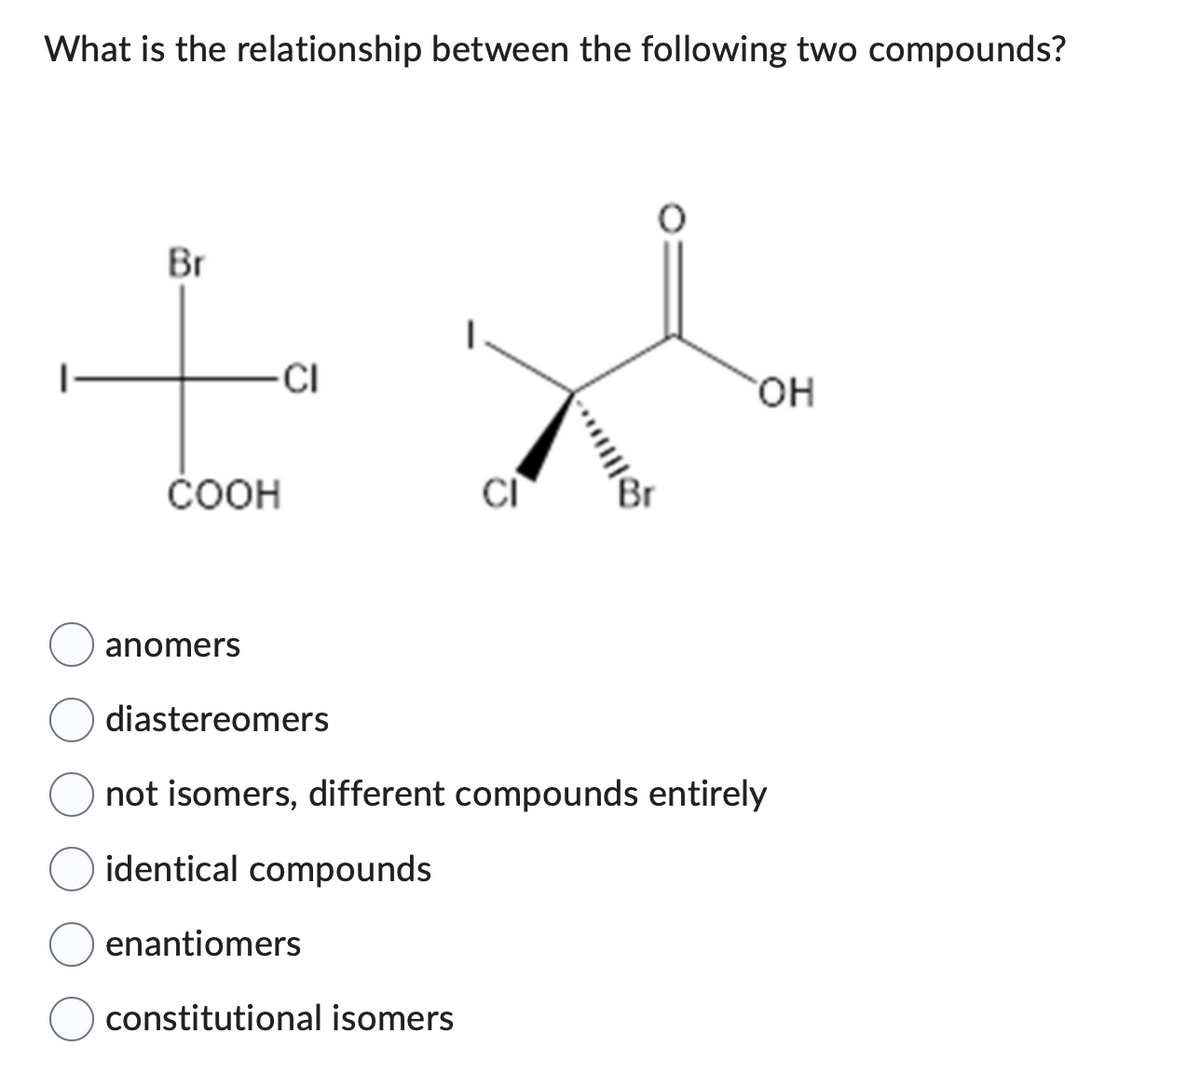 What is the relationship between the following two compounds?
Br
-CI
COOH
anomers
CI
enantiomers
constitutional isomers
OH
diastereomers
not isomers, different compounds entirely
identical compounds